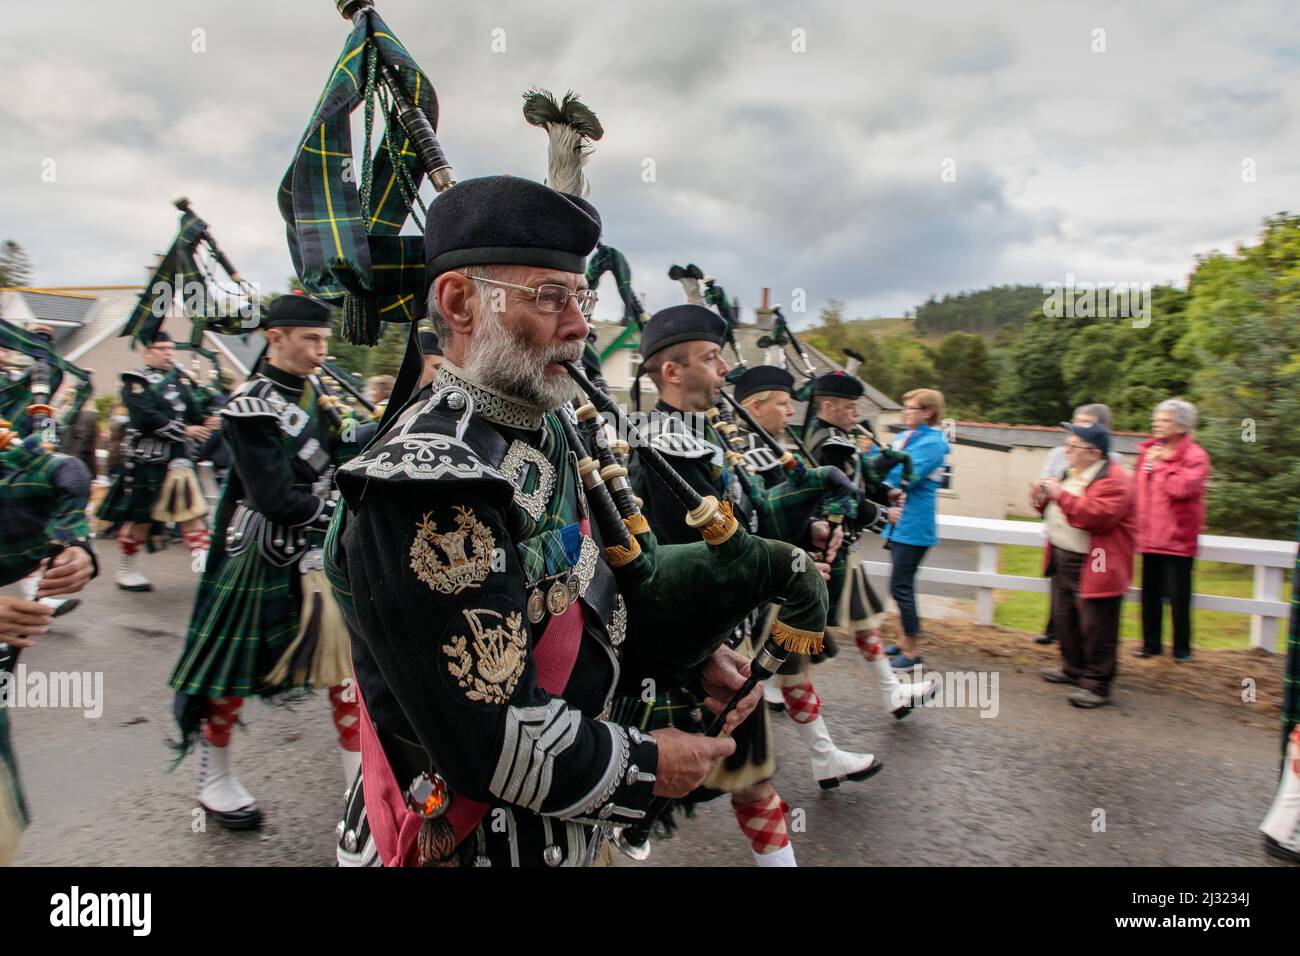 Men of Lonach parade, pipe band in highland dress, bagpipes, Strathdon, Aberdeenshire, Scotland UK Stock Photo